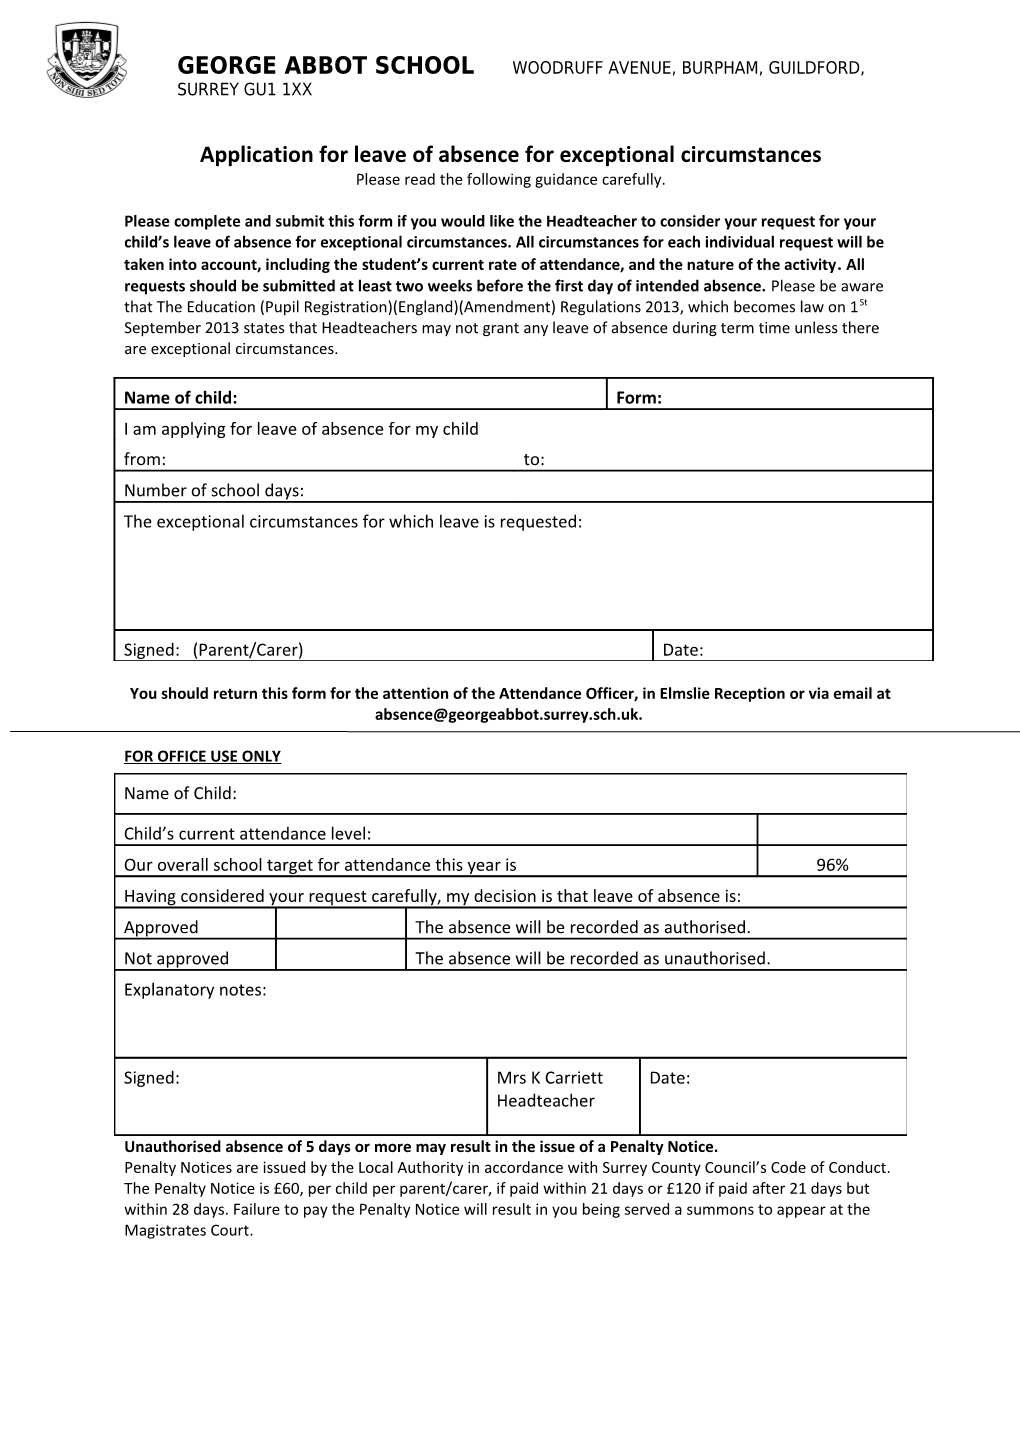 Application for Leave of Absence for the Purposes of a Family Holiday